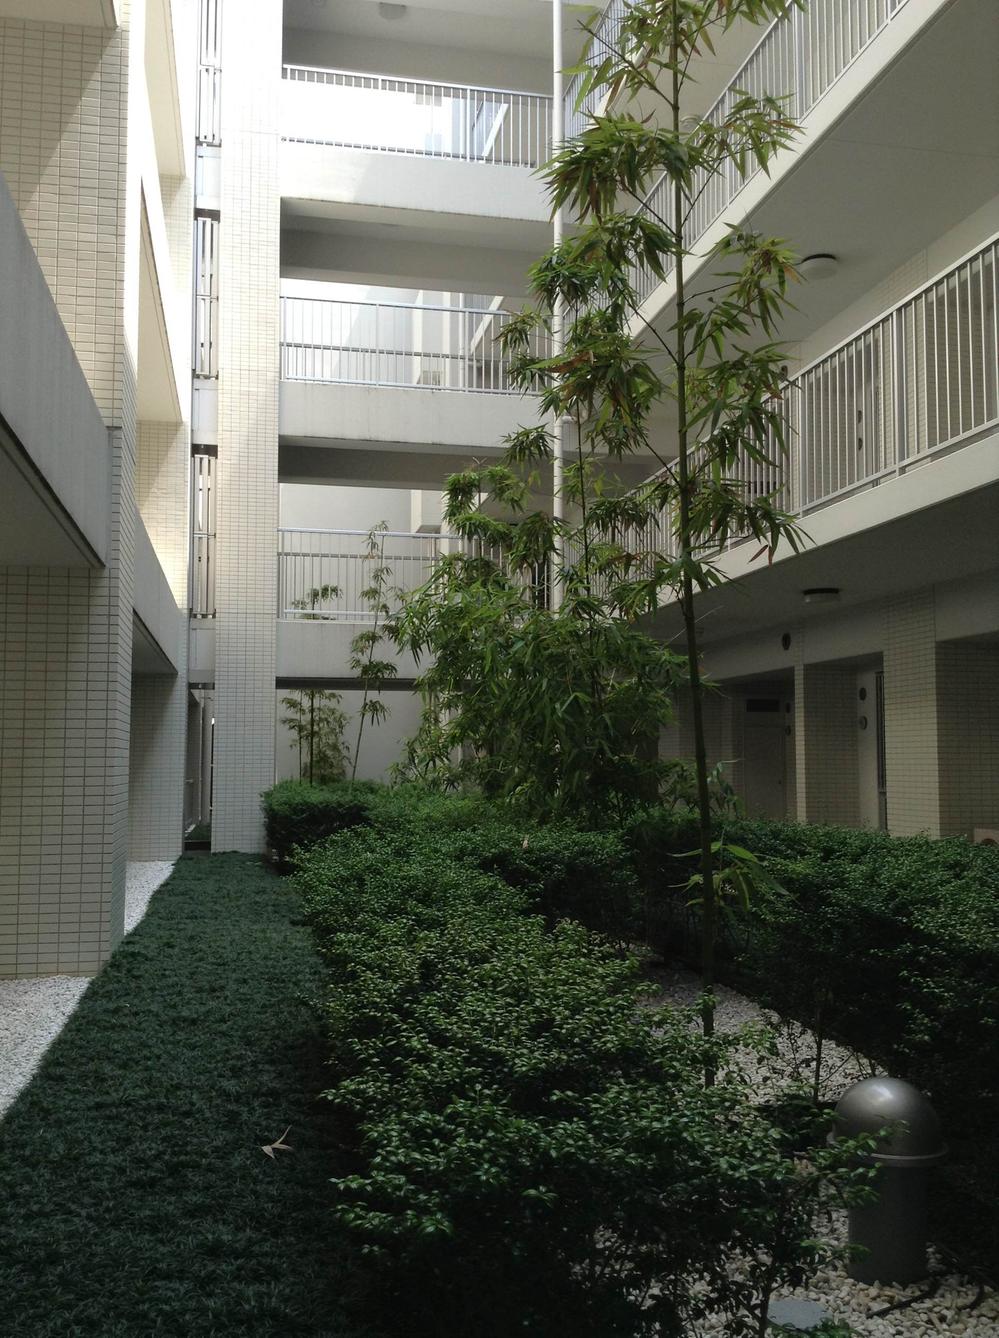 Other common areas. Space is to settle down if there is green even in the courtyard of the site.